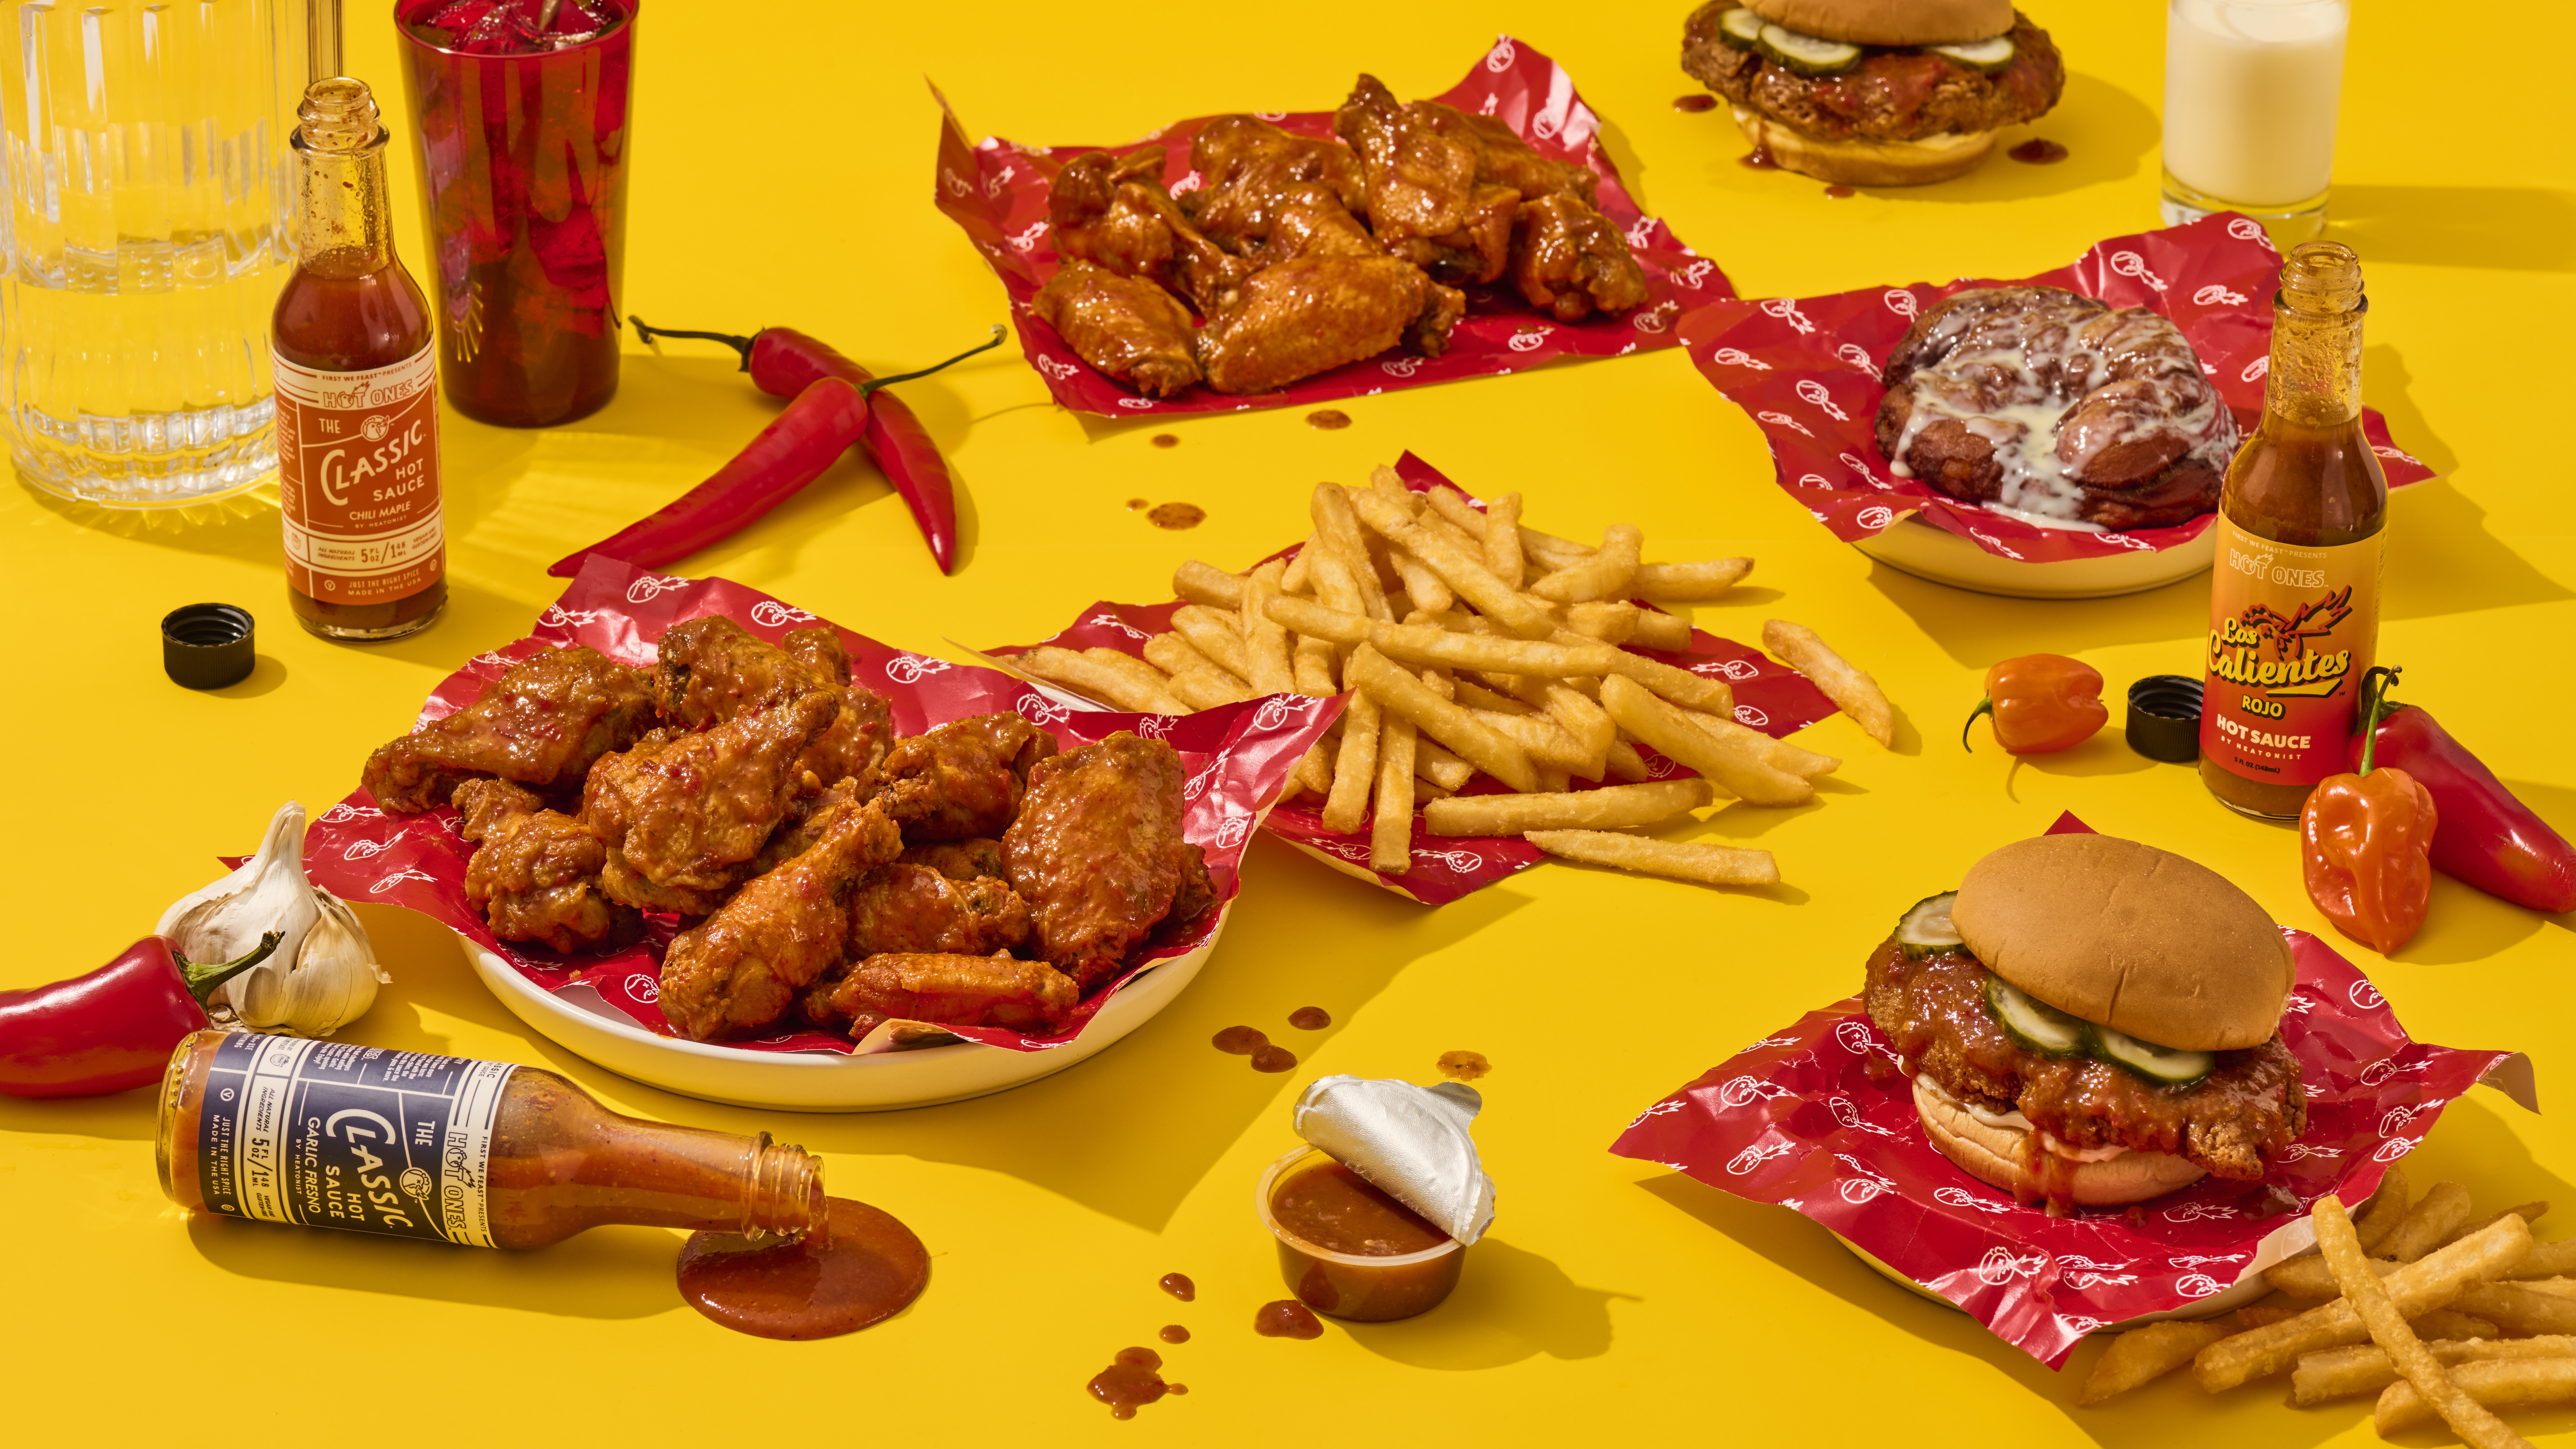 Taste Spicy Chicken Wings and Sandwiches from the Hot Ones Delivery Pop-Up